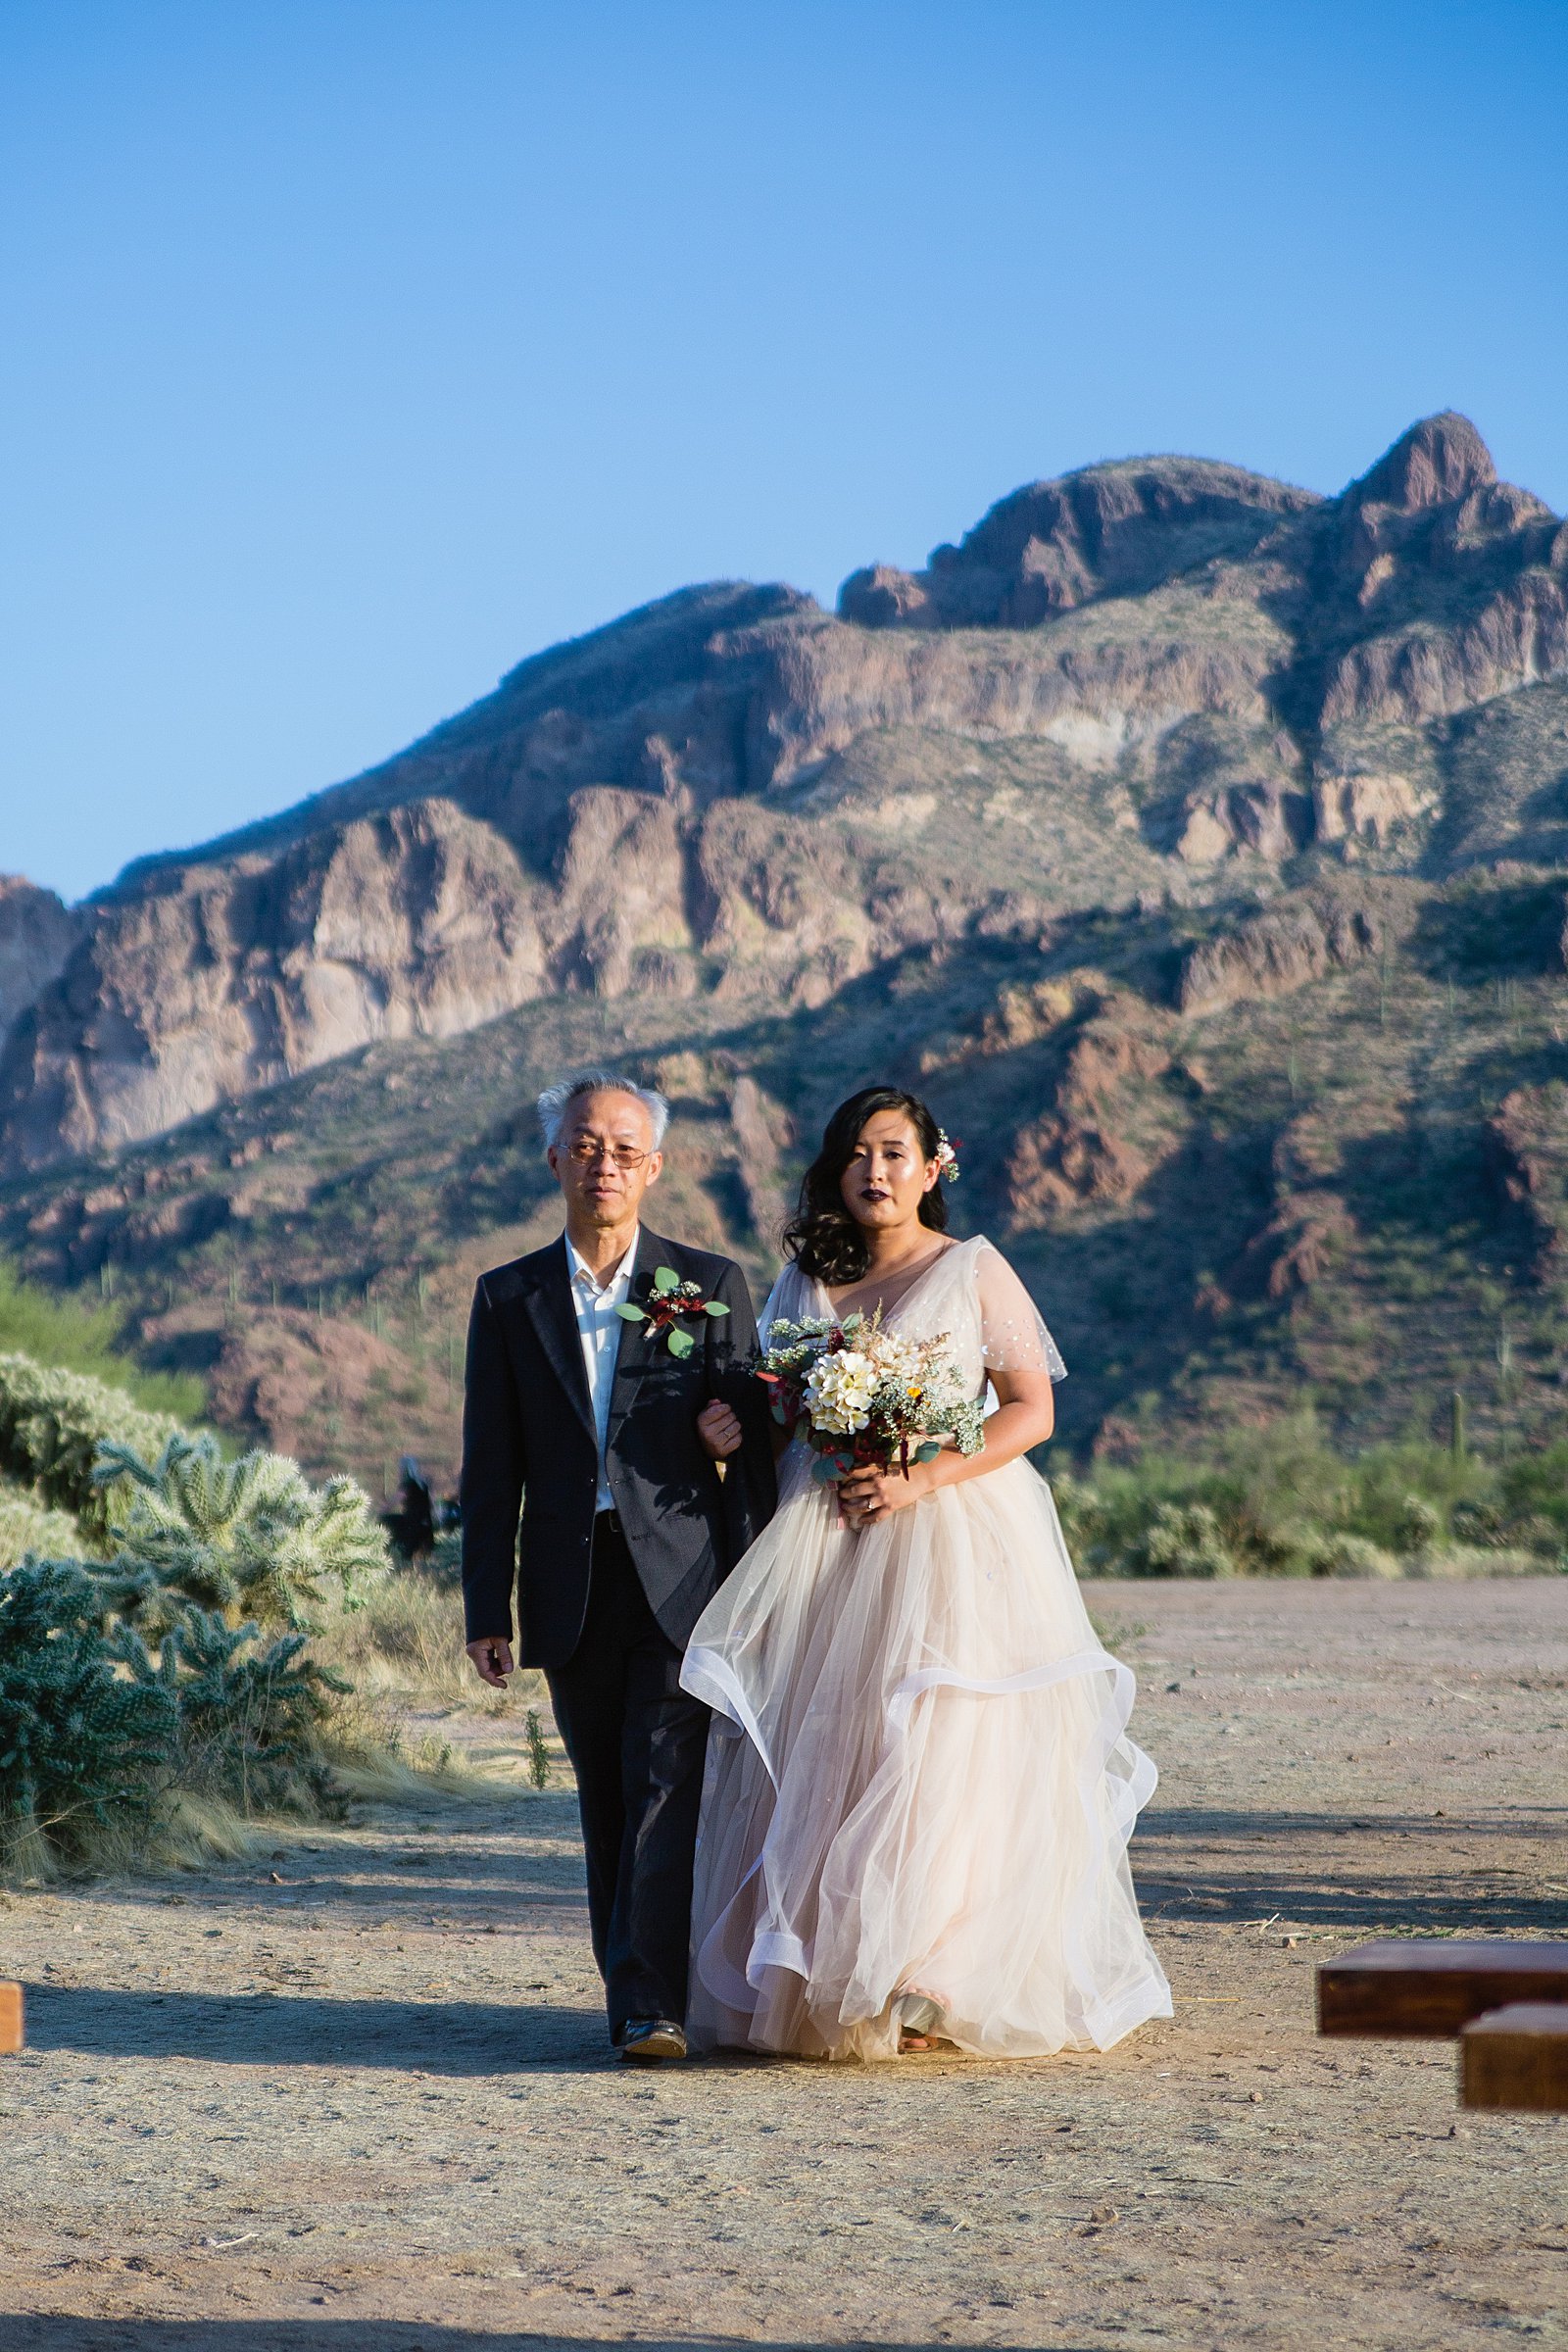 Bride walking down aisle during the Superstition Mountains wedding ceremony by Phoenix wedding photographer PMA Photography.